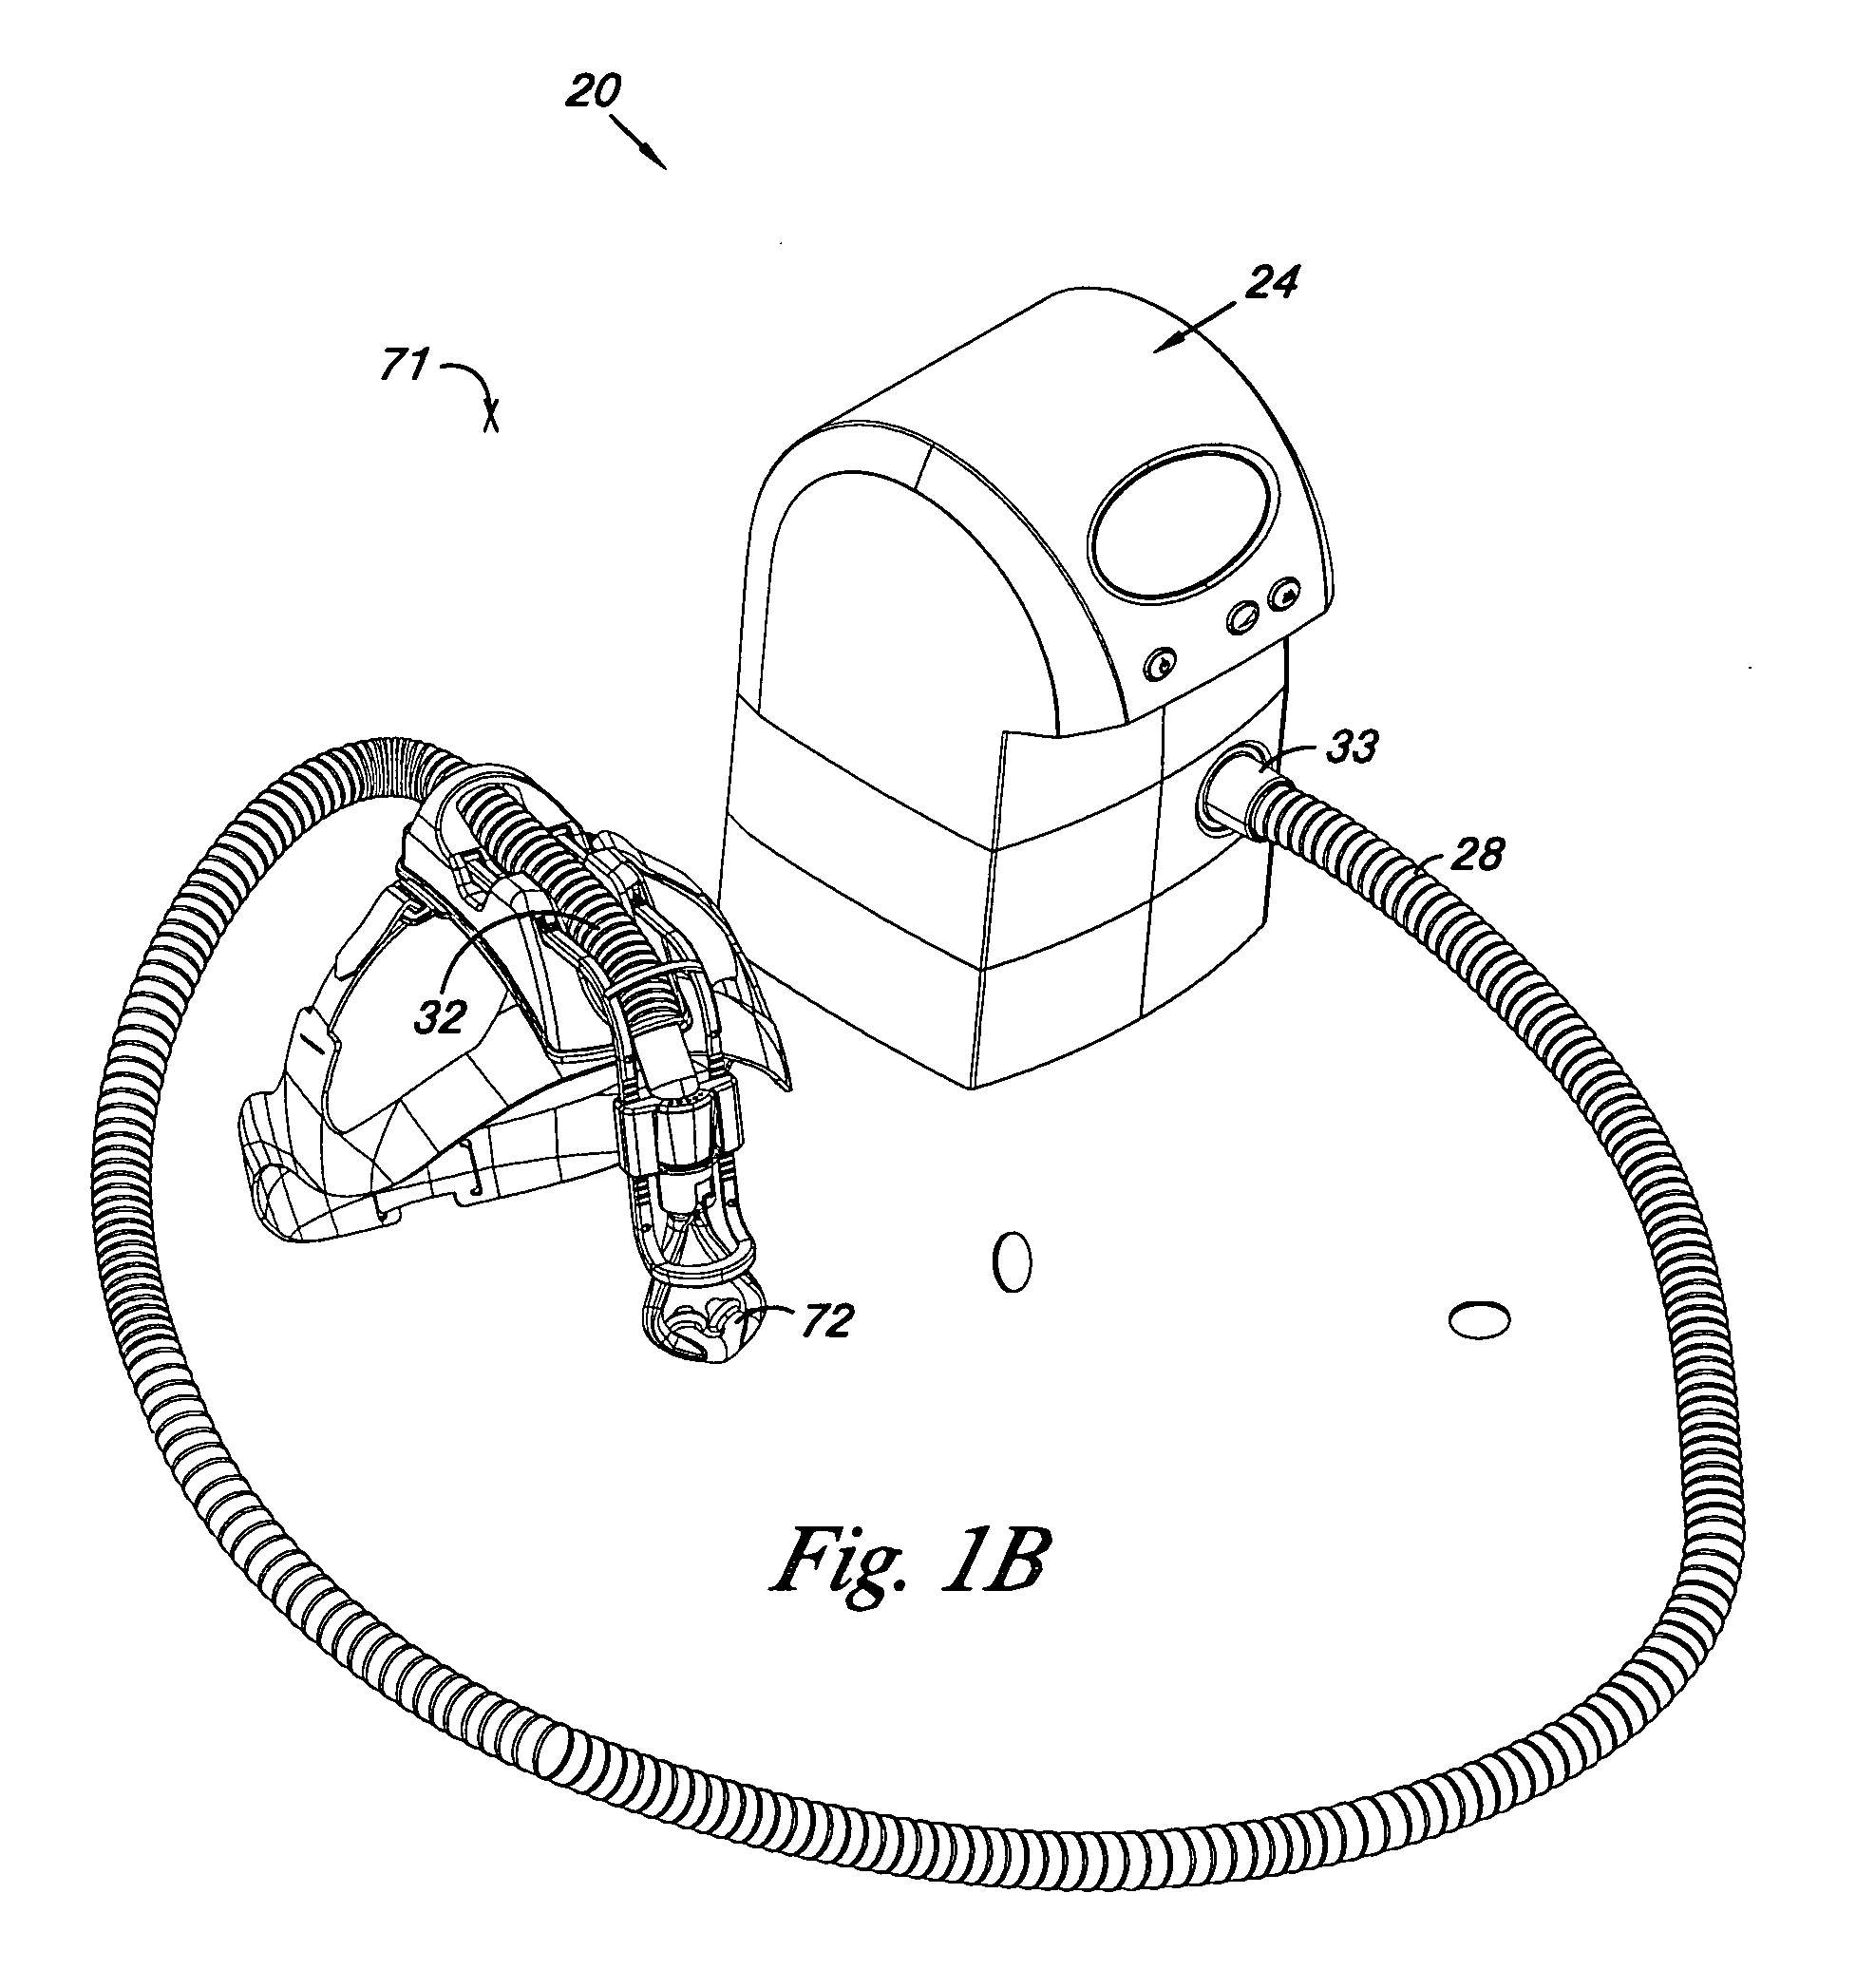 Apparatus for CPAP therapy